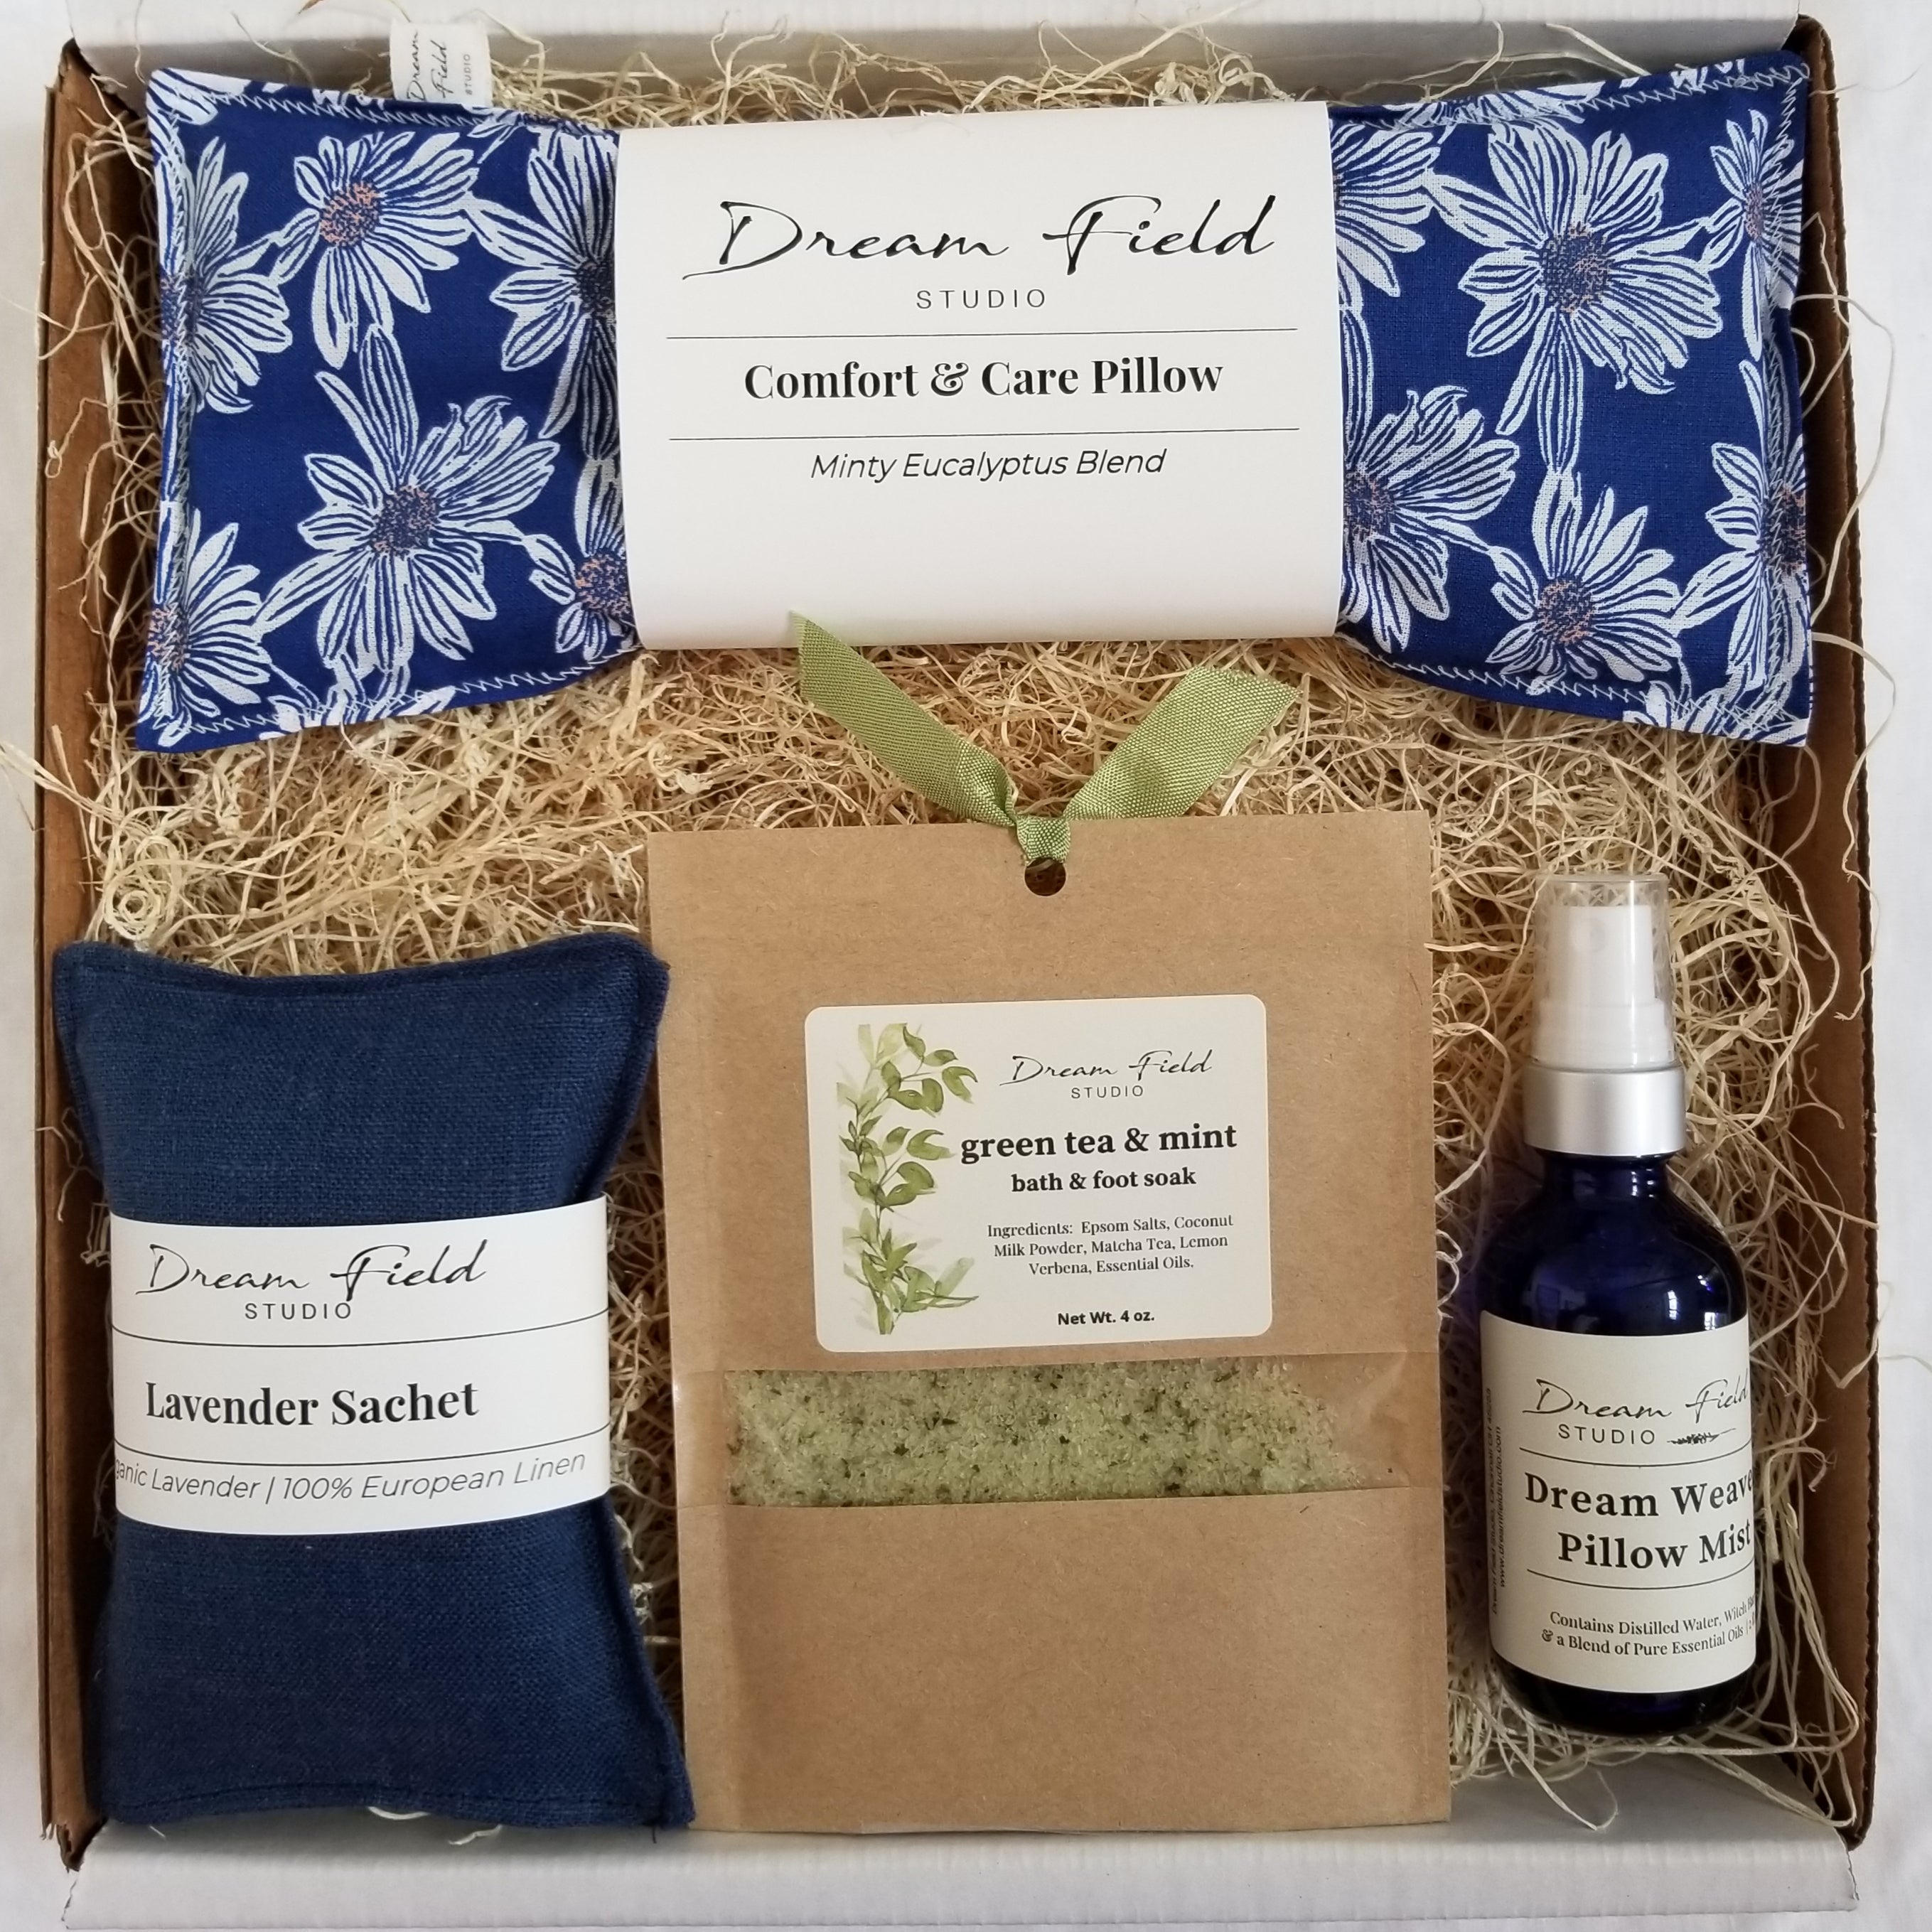 eye pillow gift set in white box with pillow spray sachet and bath salts